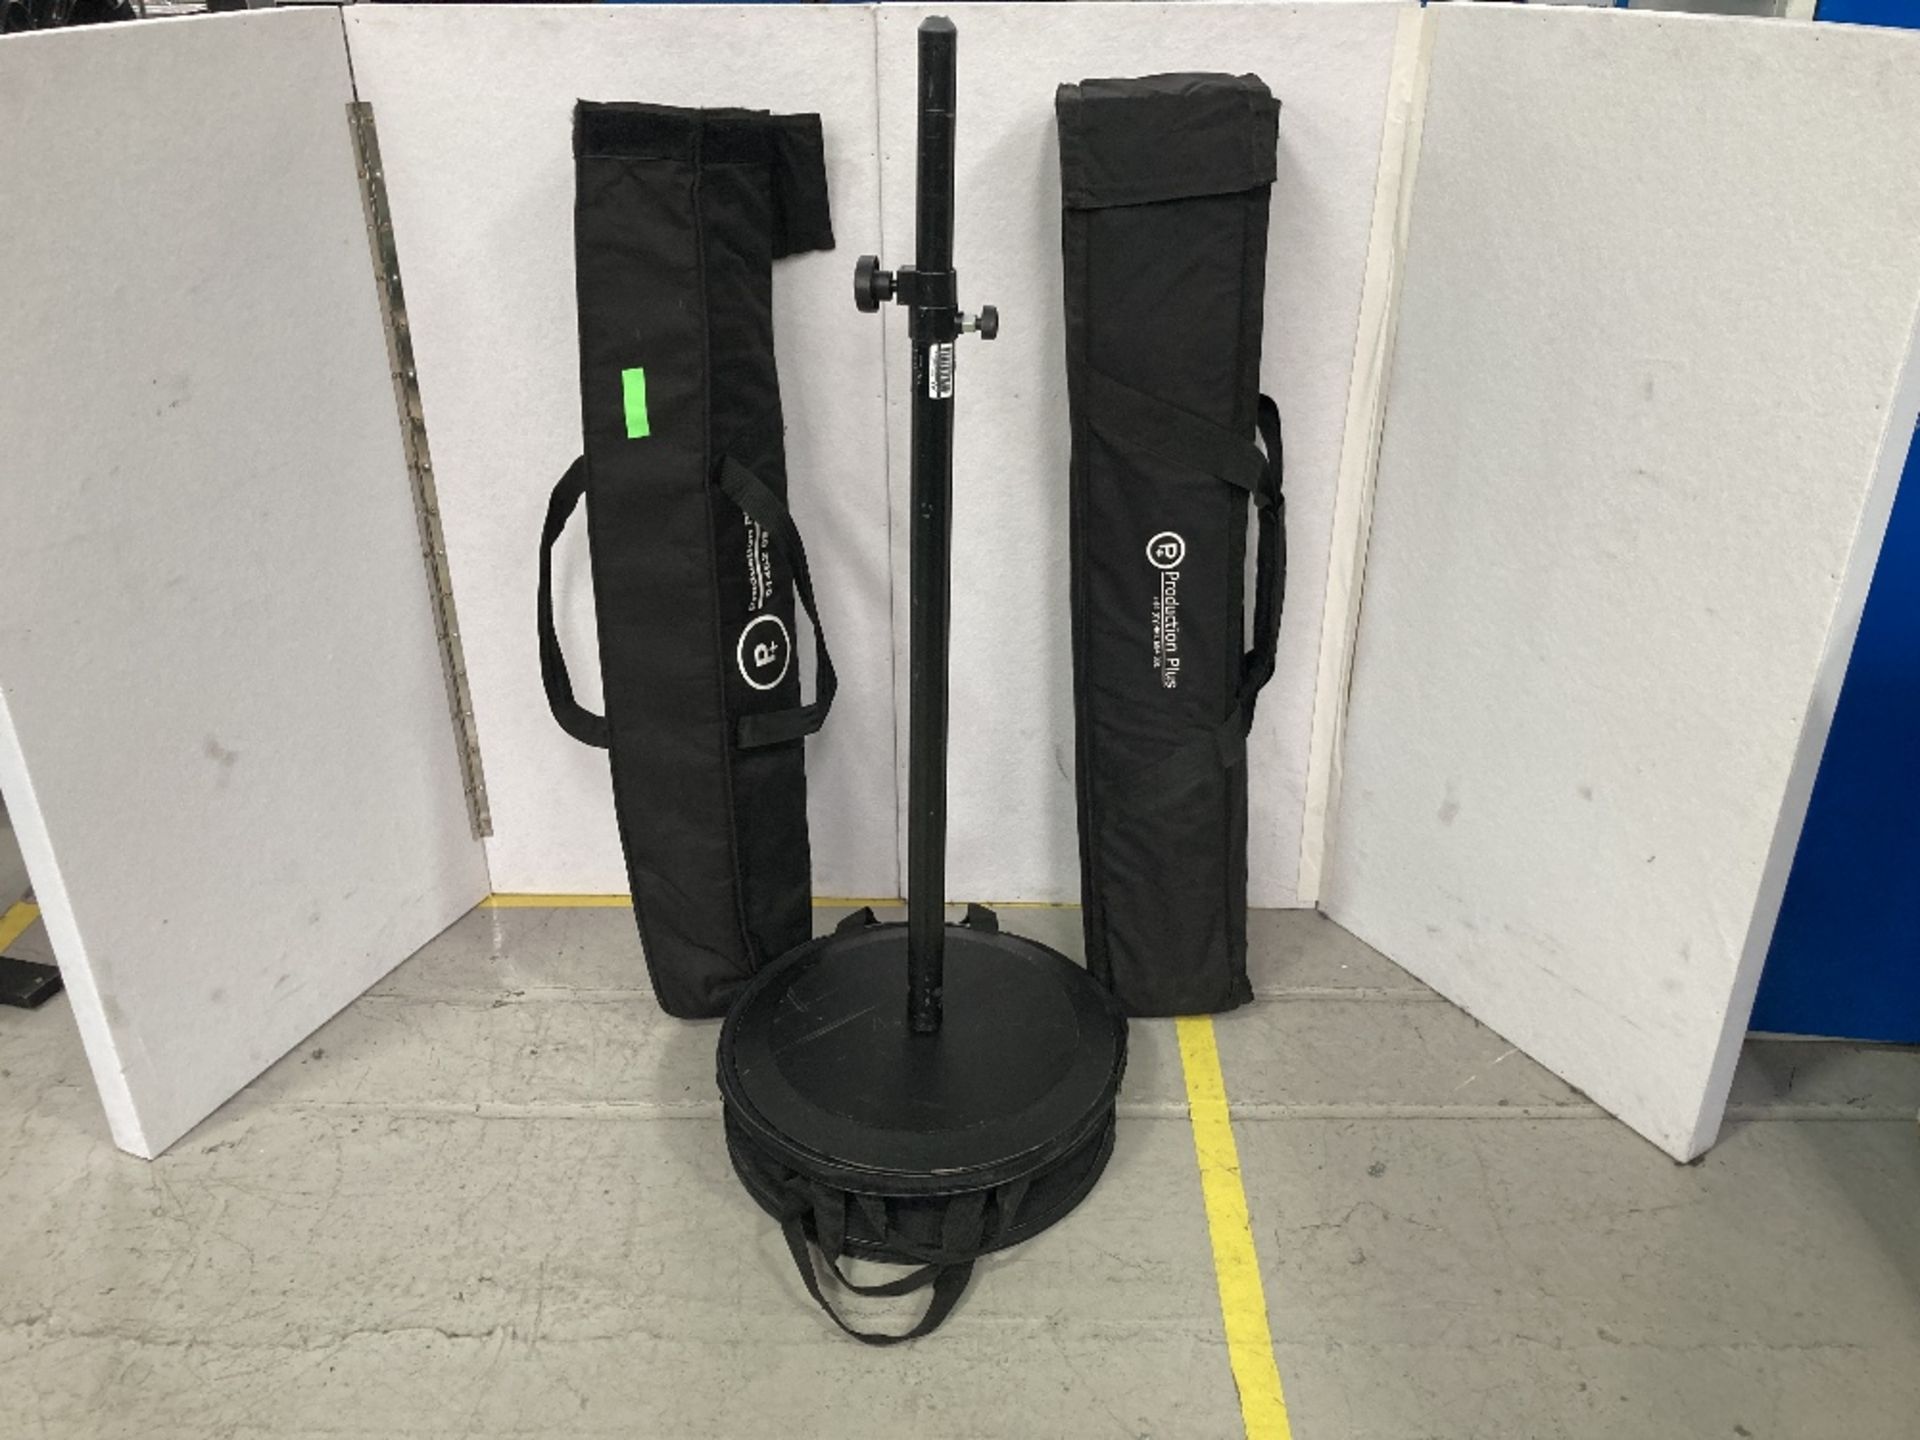 (8) Black Speaker Stands & Bases With Padded Bags